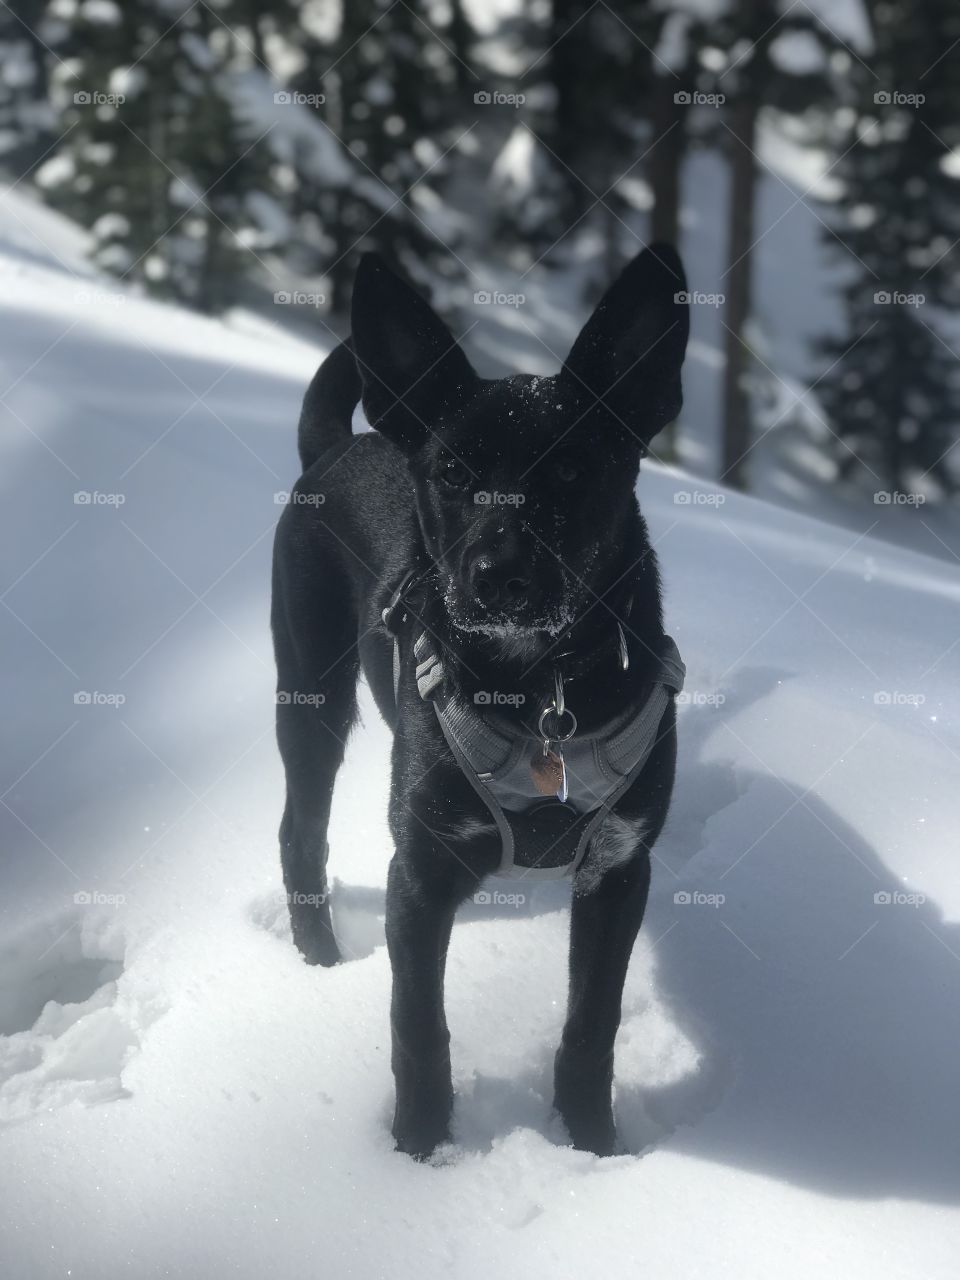 A snow dog eagerly awaiting the toss of the next stick. His black coat makes him stand out against the snow. 